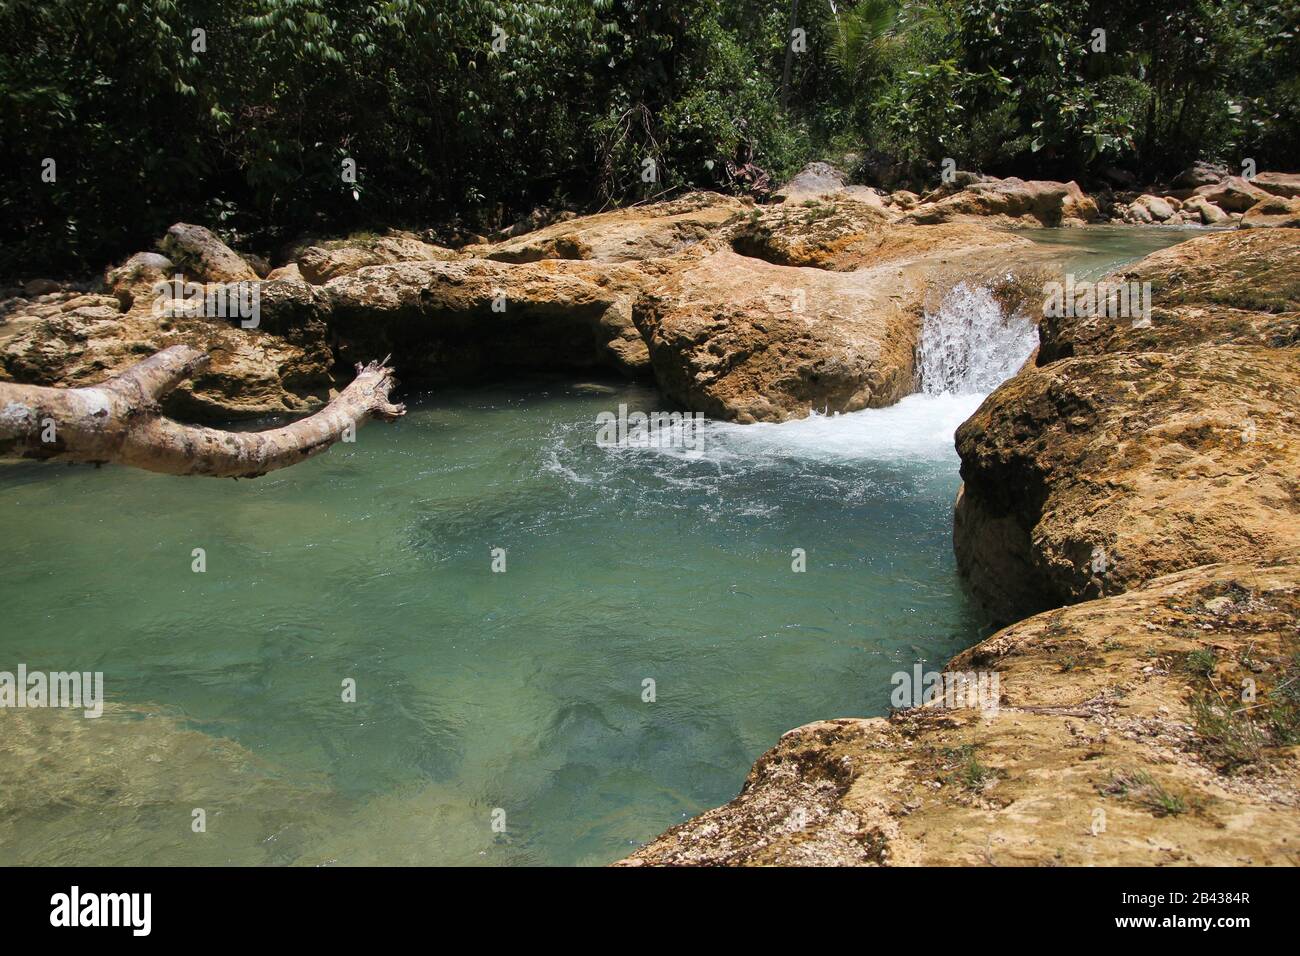 Flowing water from Baobao Falls, an attraction in Liangga, Surigao del Sur, Philippines. Stock Photo